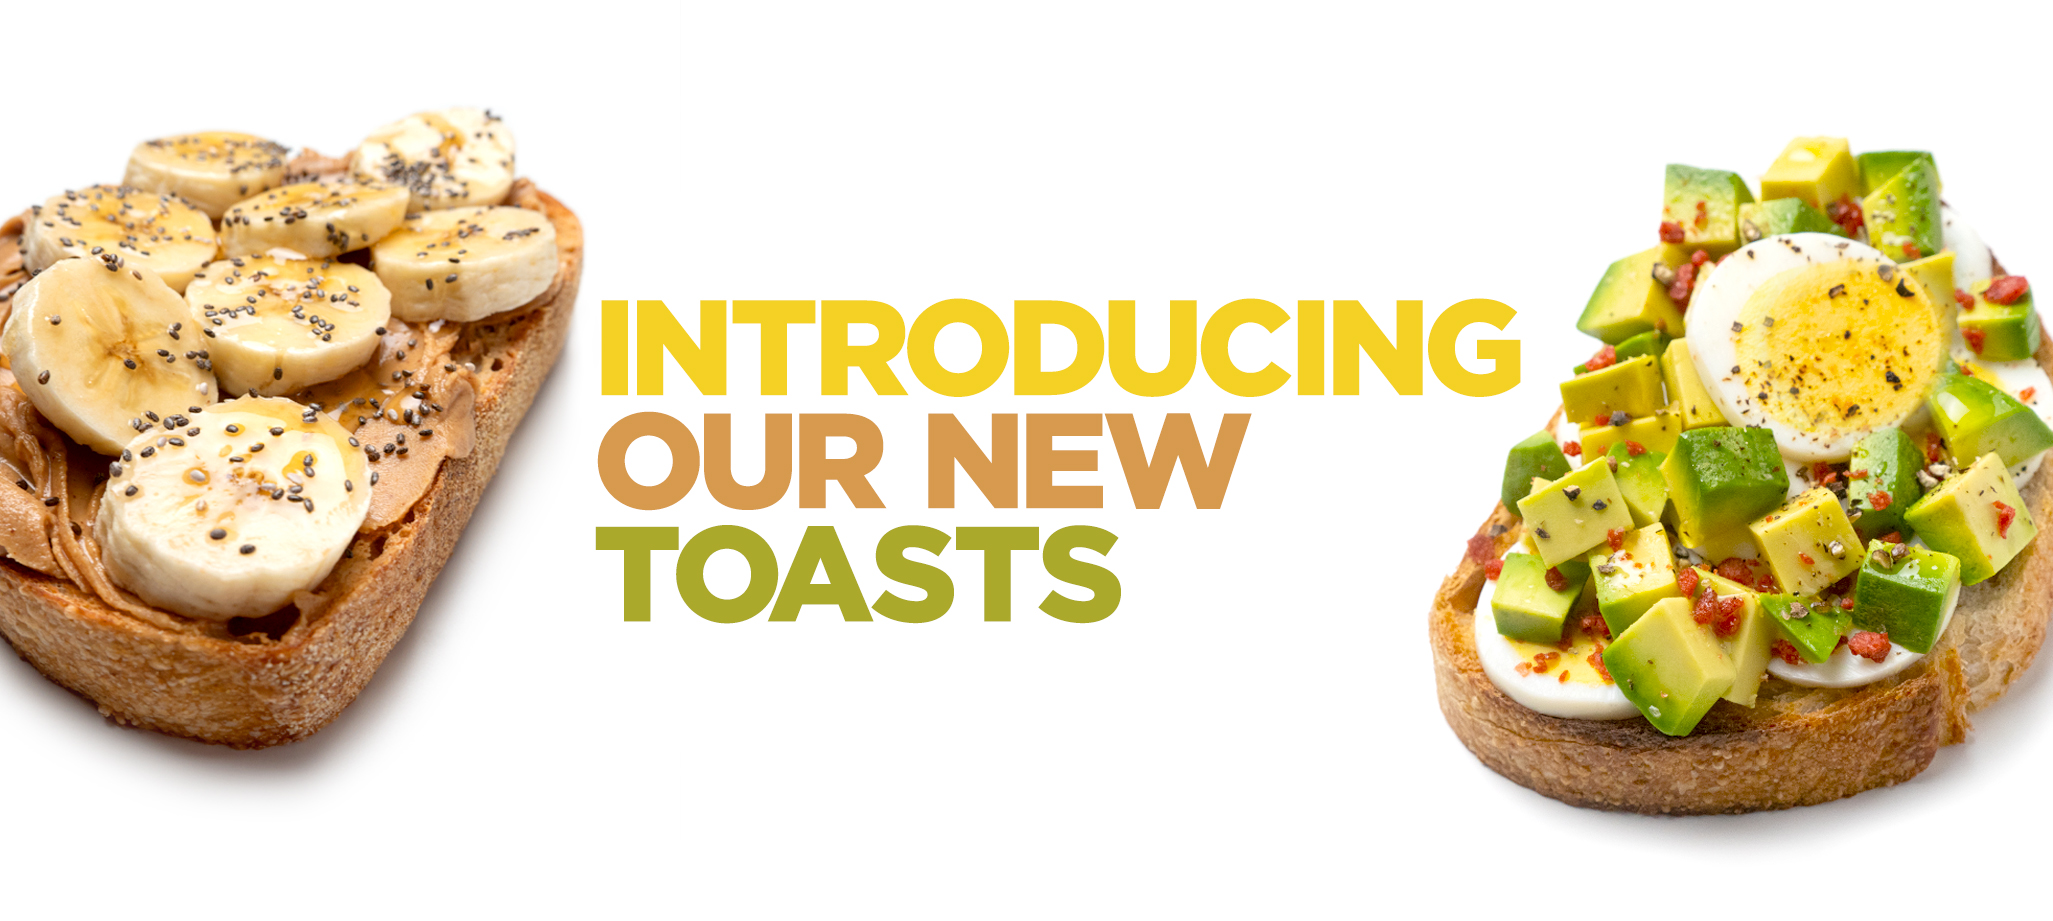 Introducing Our New Toasts